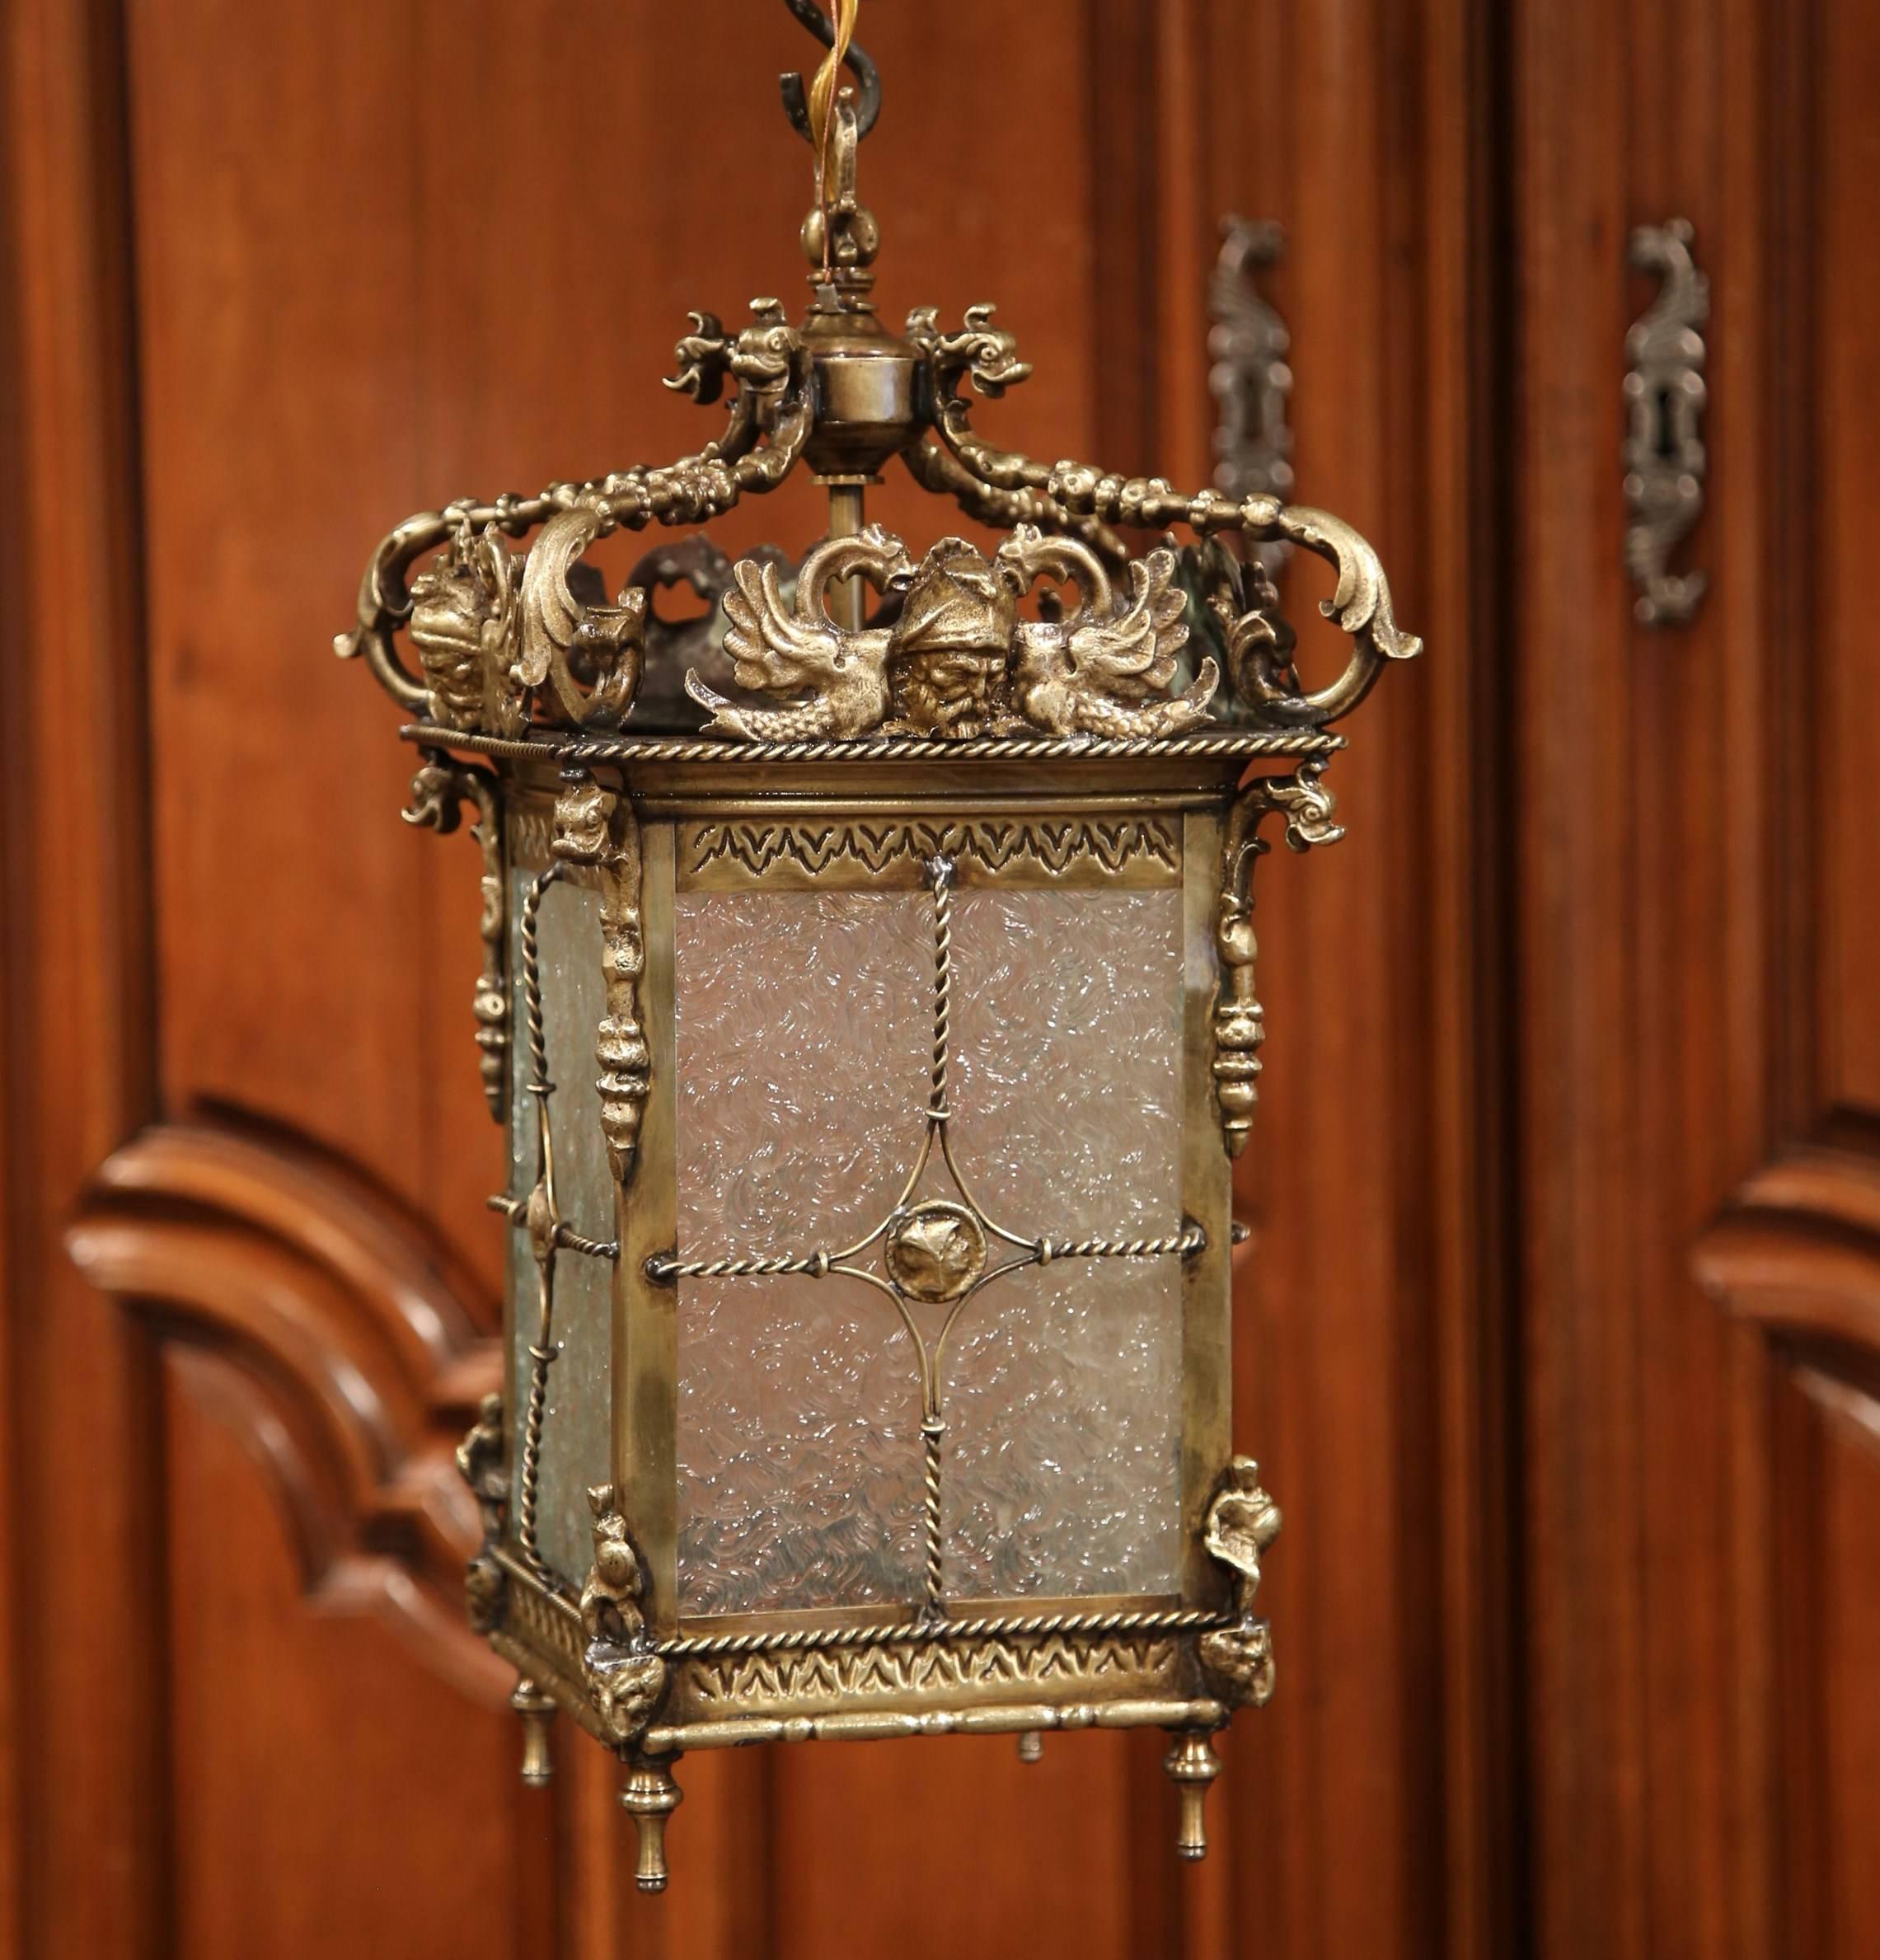 This elegant antique Napoleon III wall lantern was crafted in France, circa 1880. The unique, square light fixture has bottom finials and features classical Roman heads on the top, Roman guards and dolphin heads mounts in each corner, and Roman